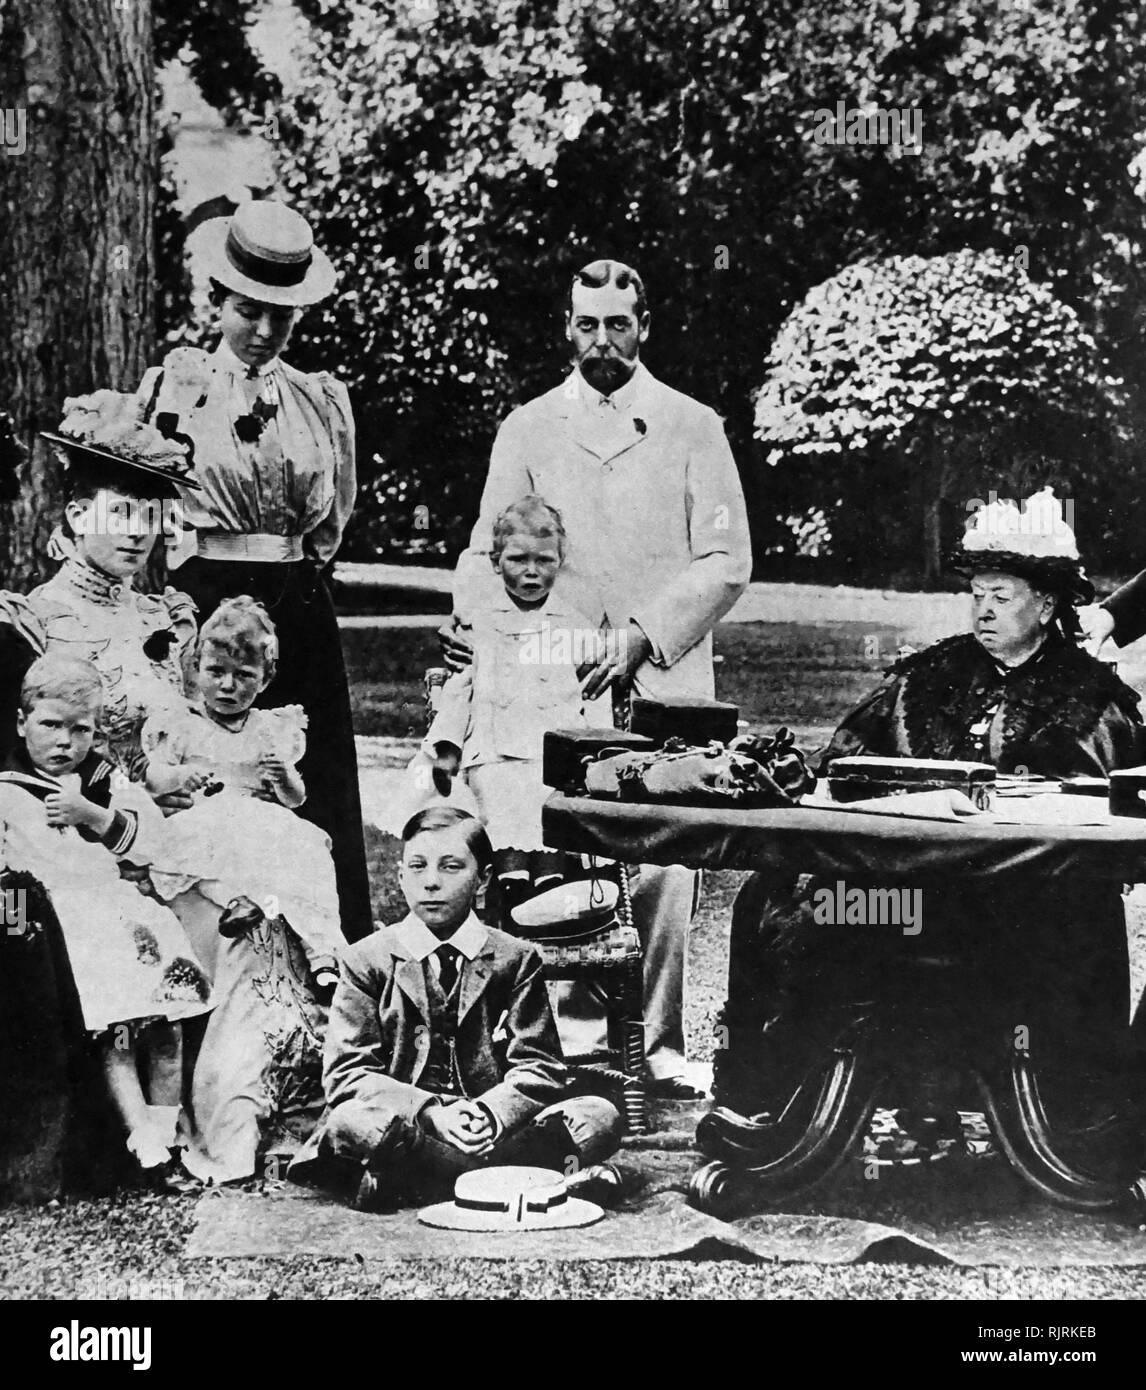 Queen Victoria of Great Britain at Osborne House with members of her immediate family; Left: Princess Mary of Teck holds Prince Edward (Edward VIII) and Princess Mary; Centre: Prince George (George V) holds the future King George VI. Stock Photo